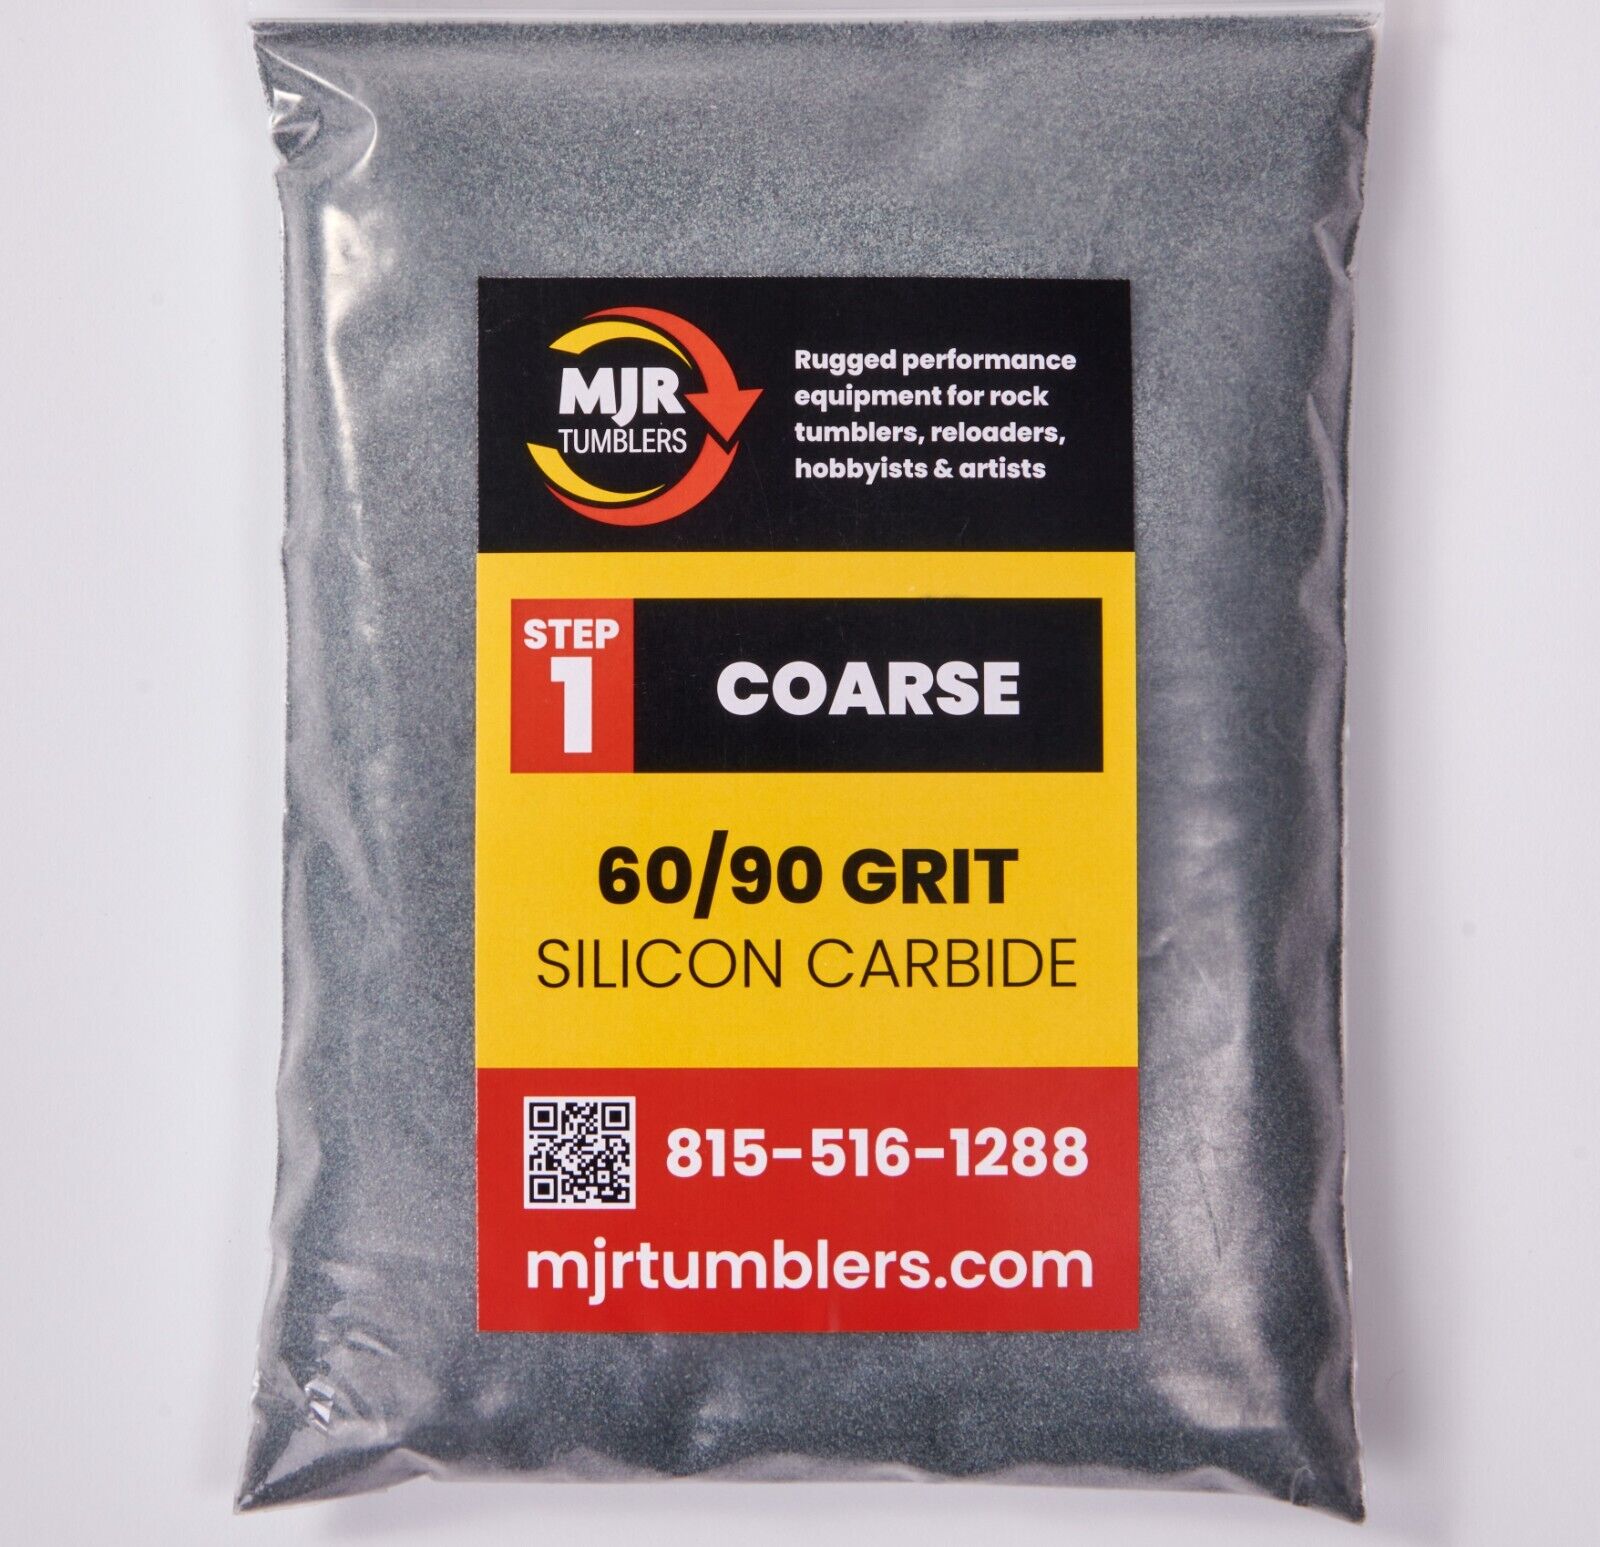 4lb of 60/90 Grit Coarse Rock Tumbling Silicon Carbide Polish for Lapidary use